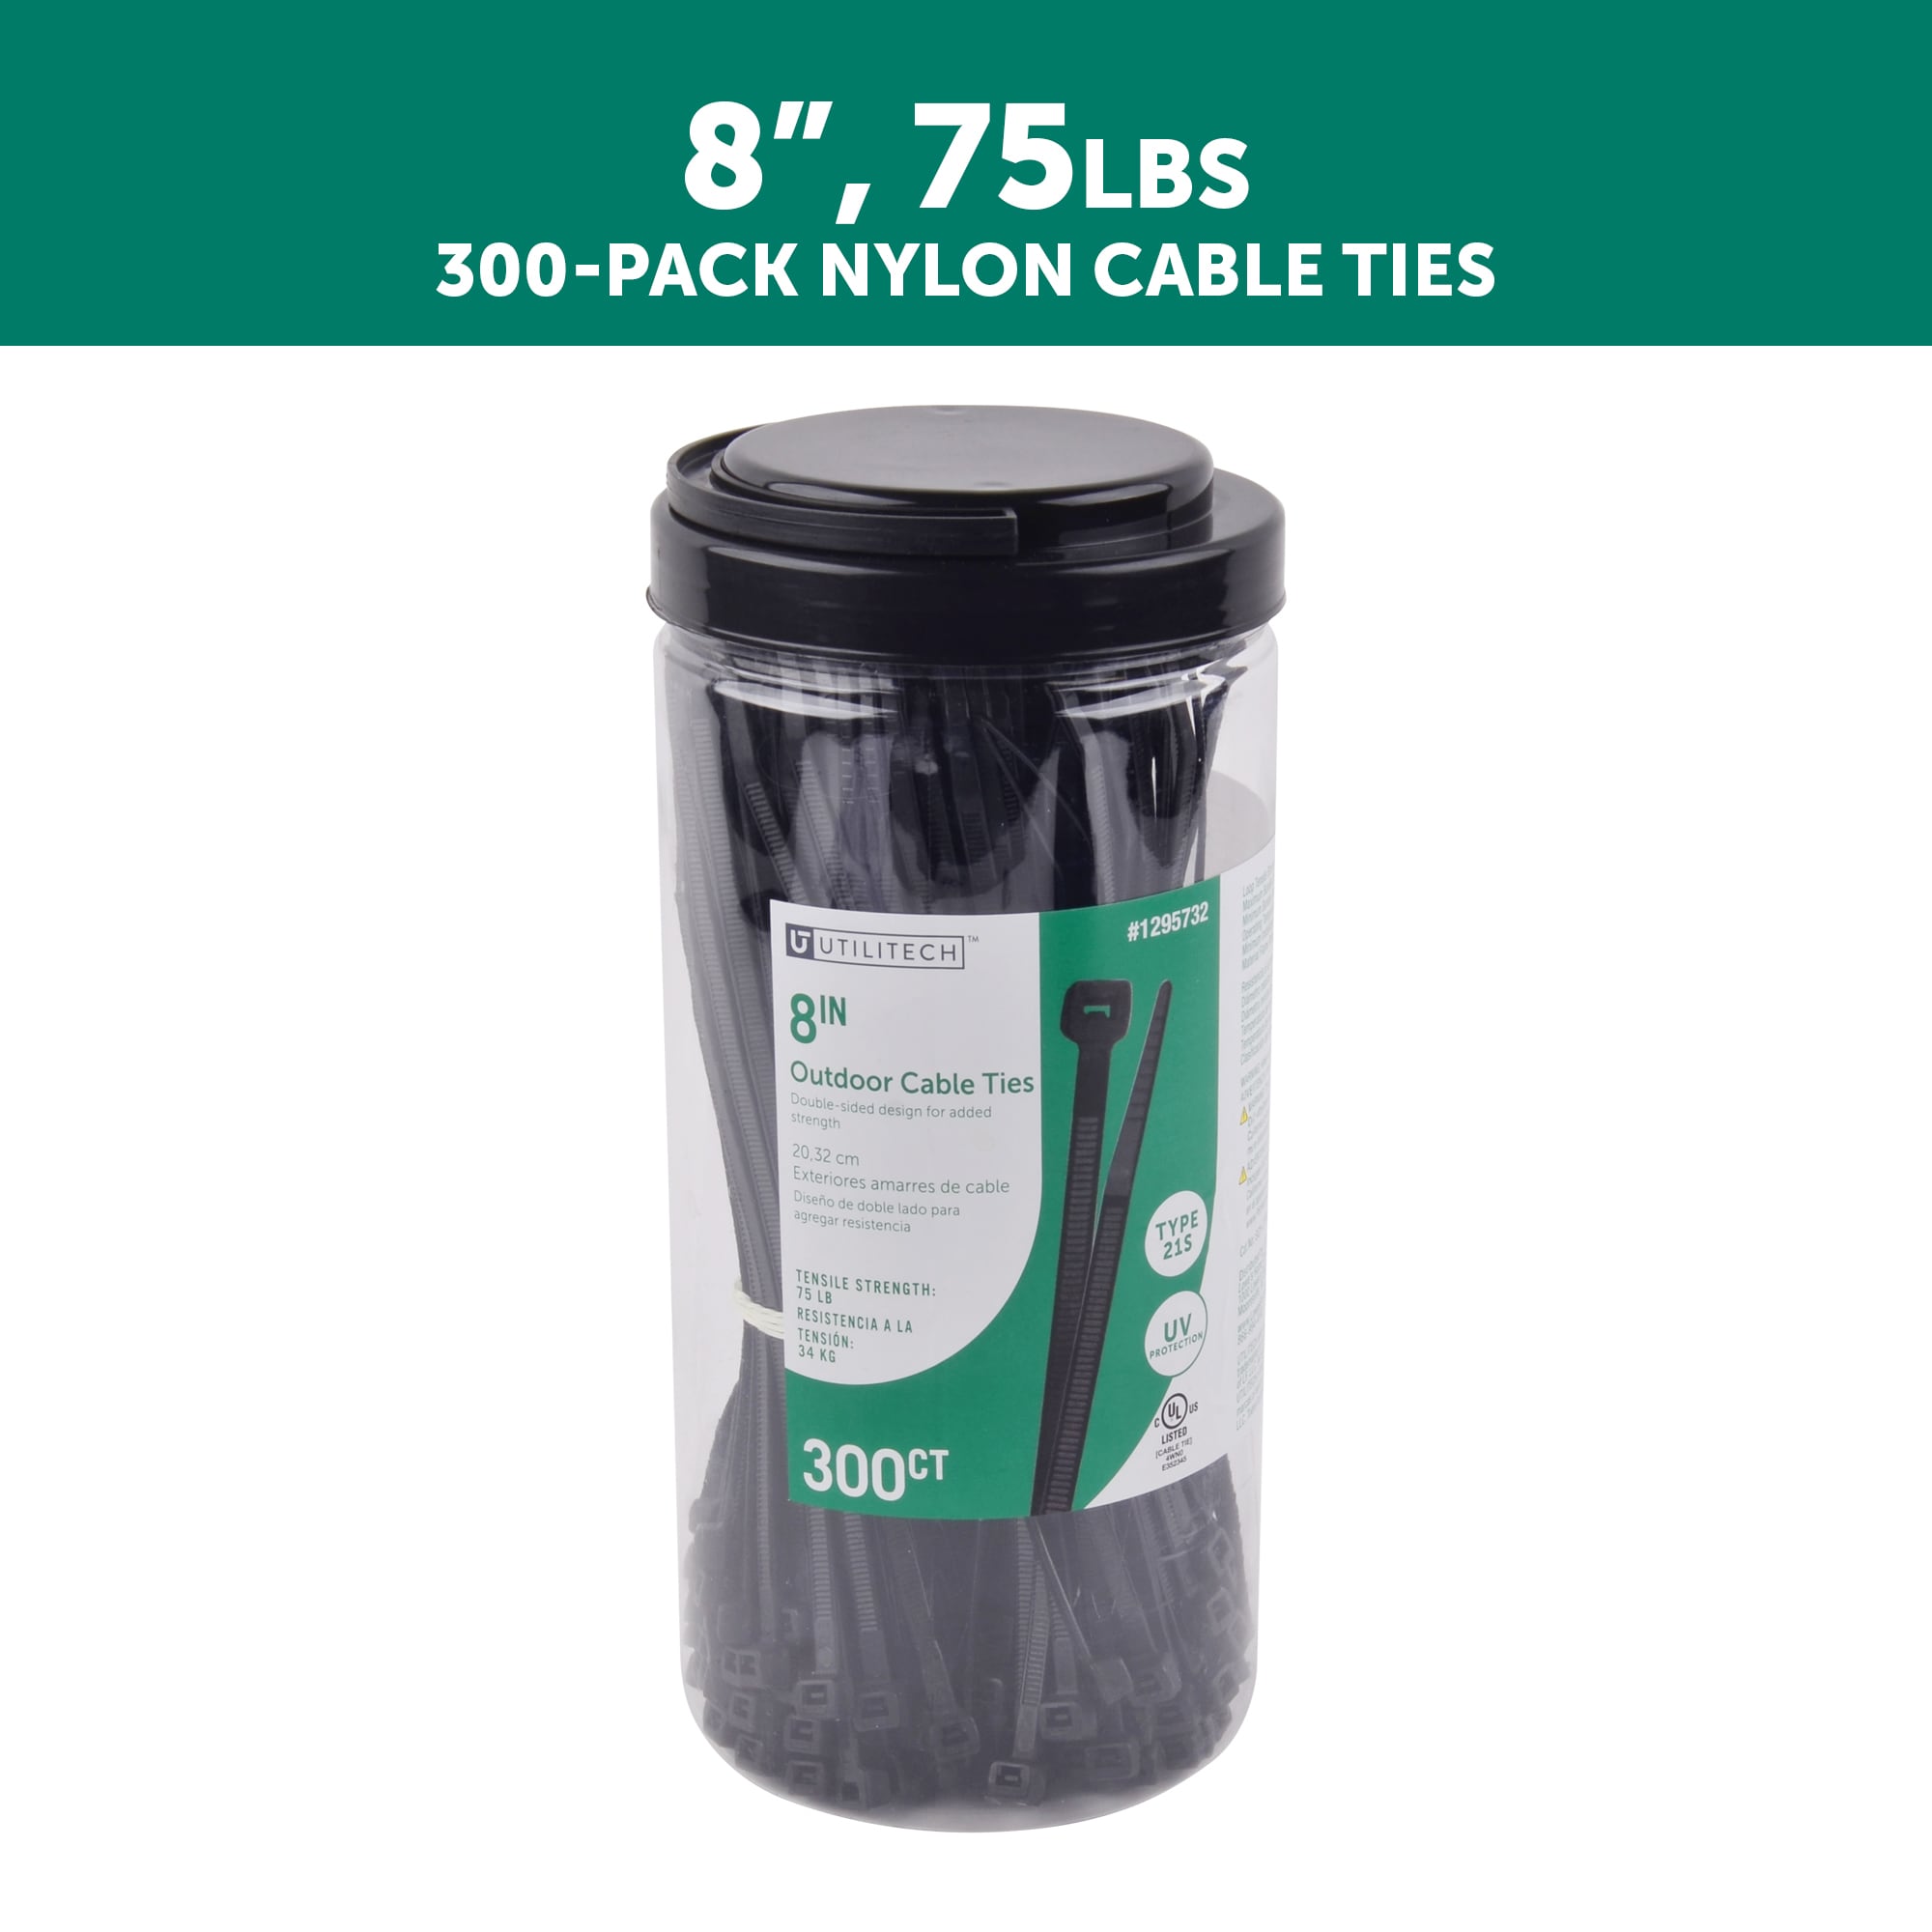 Utilitech 8-in Nylon Zip Ties Black with Uv Protection (300-Pack)